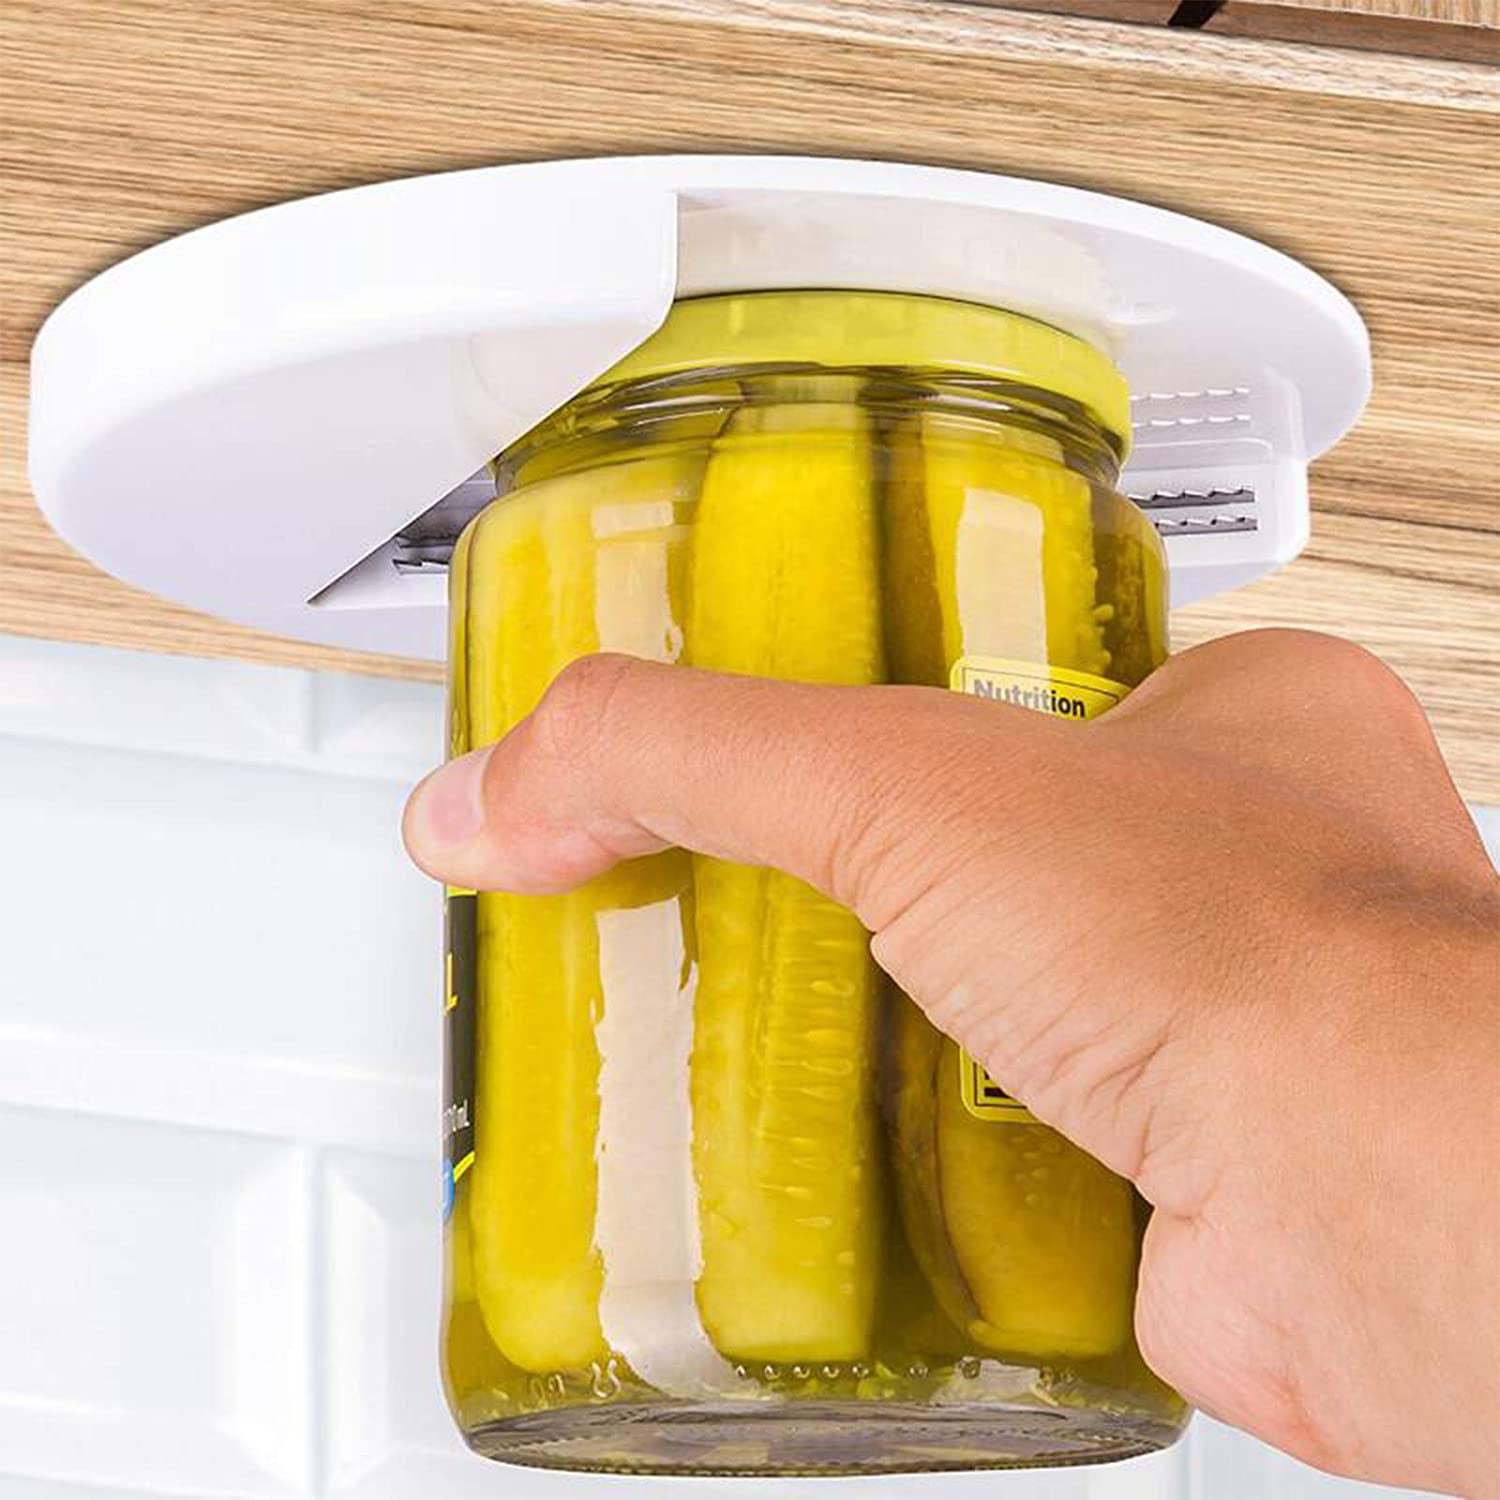 Food Network on X: NEVER struggle with opening jars again thanks to this  under-cabinet jar opener! 🤯👏 The V-shape allows it to open any size jar,  and it sticks right under a